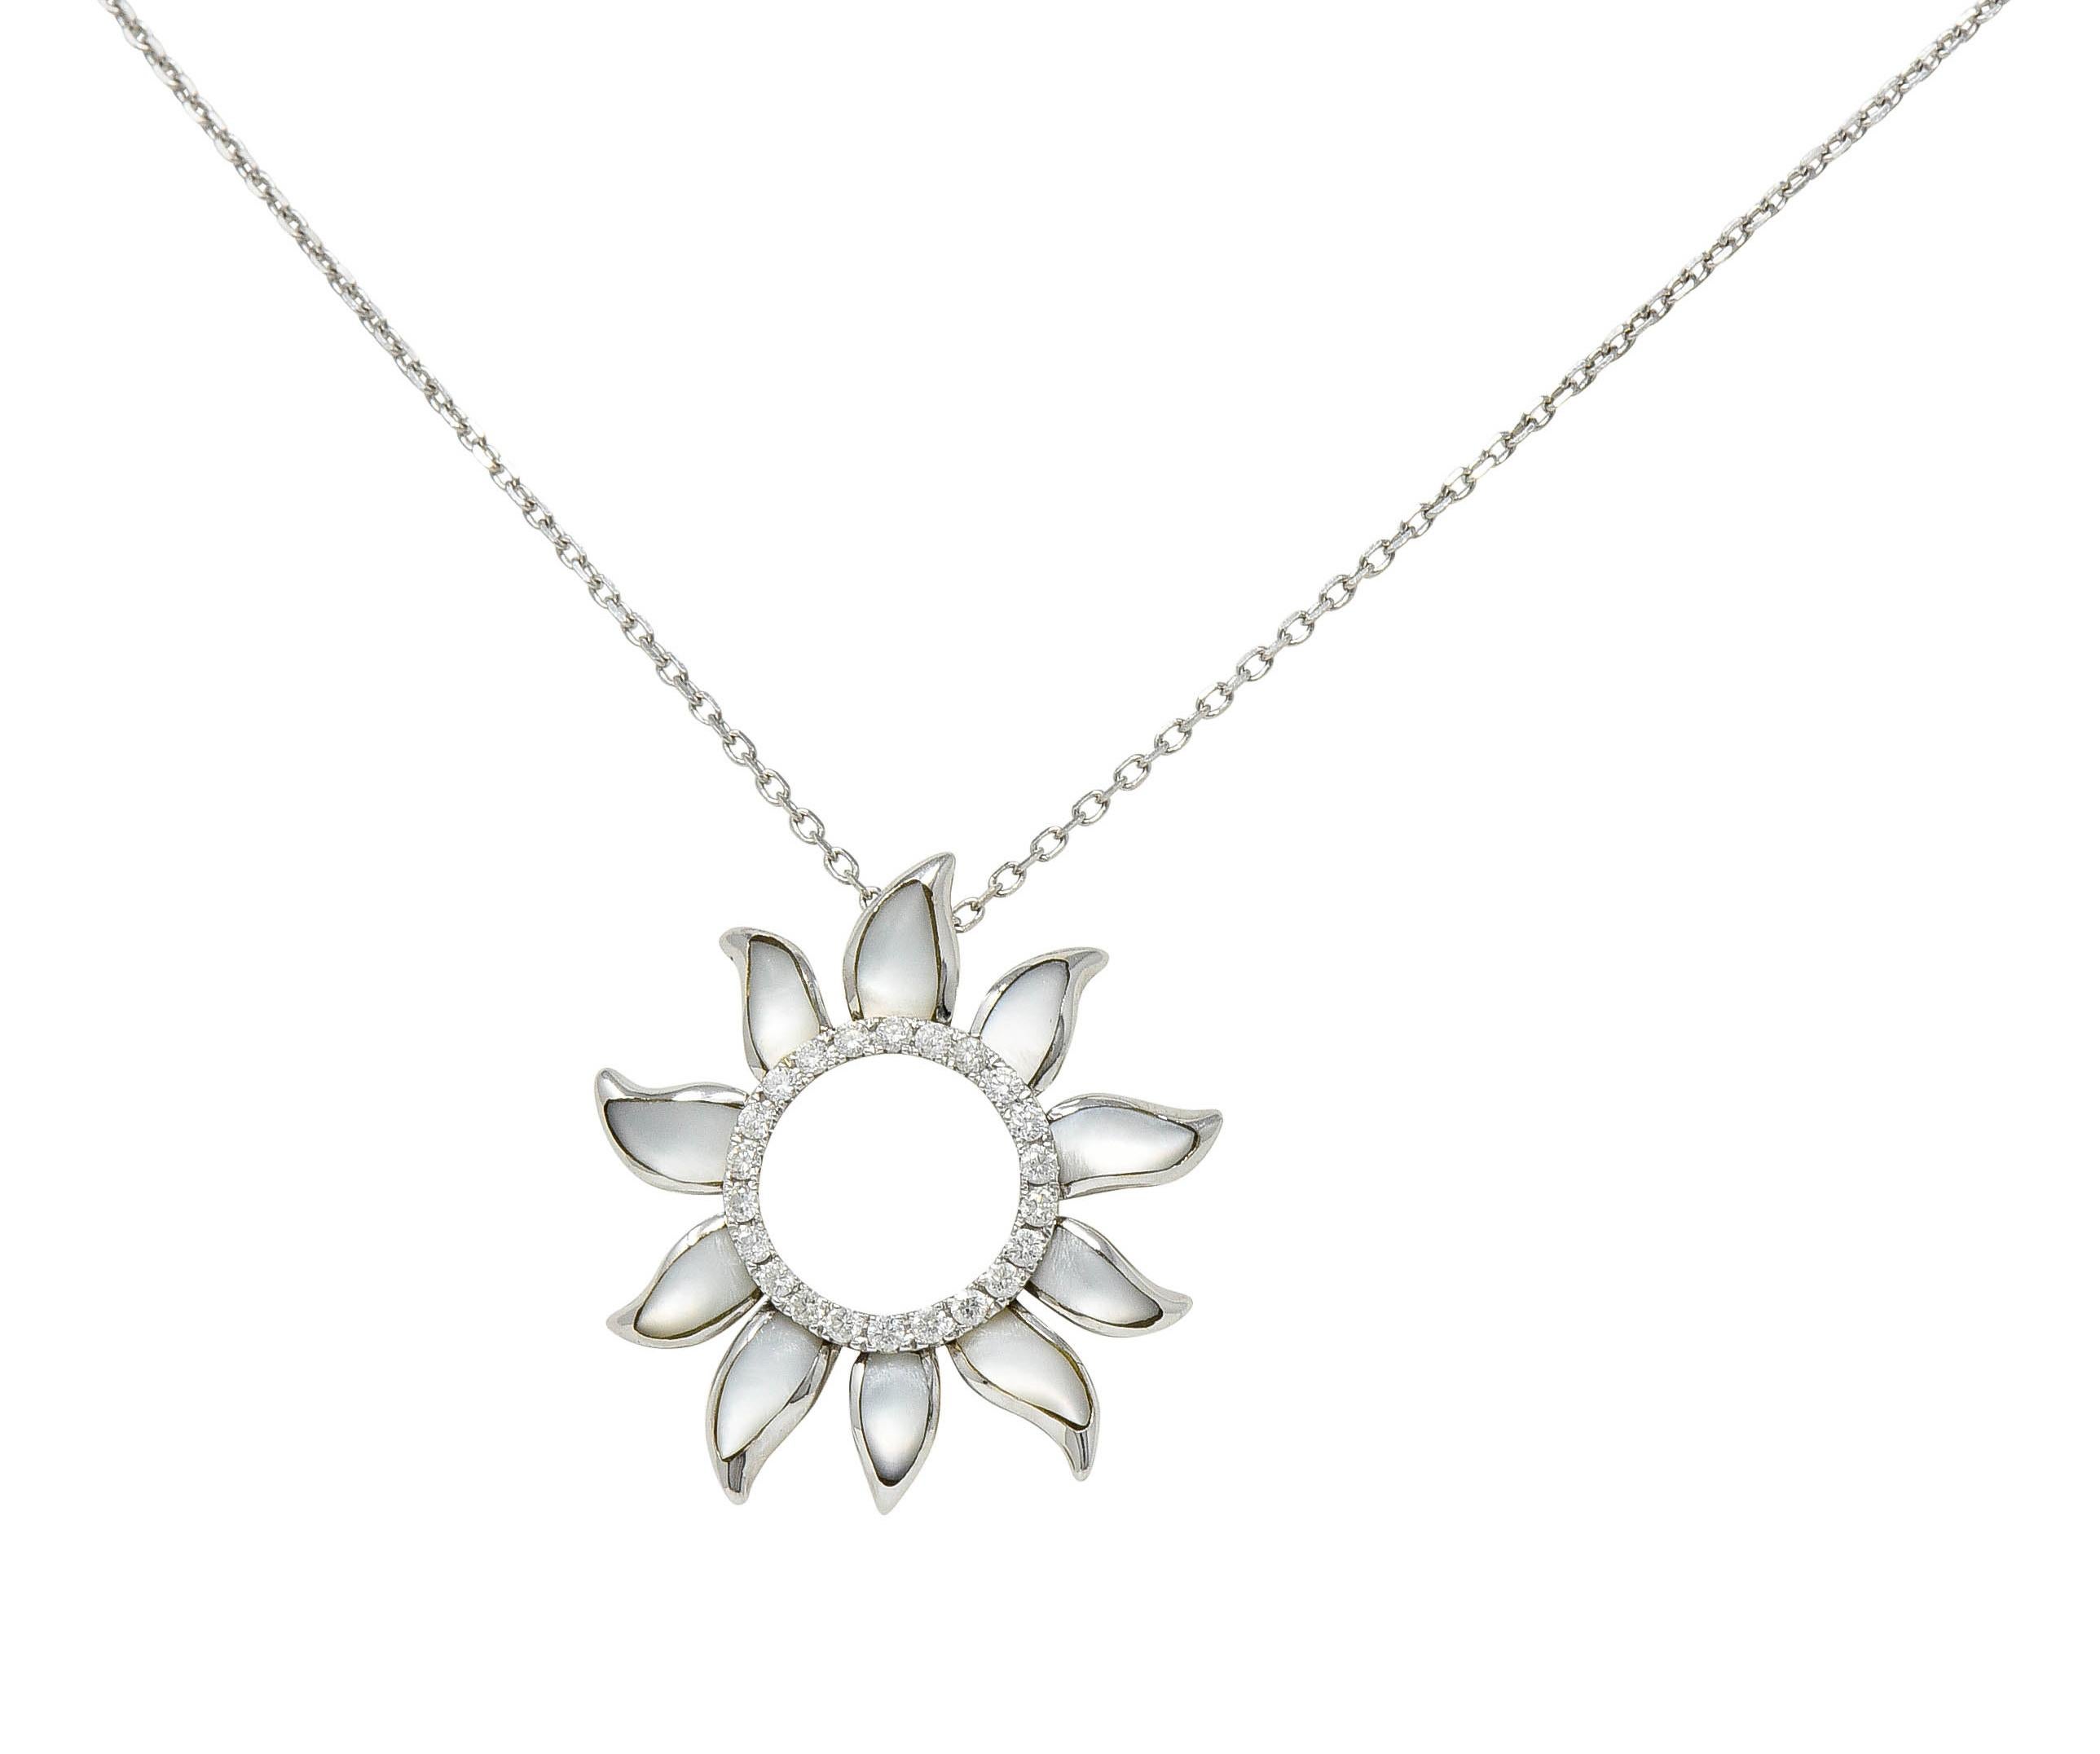 Cable chain necklace suspends a stylized sun pendant with an open center

Wavy sun rays are inlaid with white mother-of-pearl - exhibiting strongly white orient

With a halo of round brilliant cut diamonds weighing in total 0.21 carat - eye clean